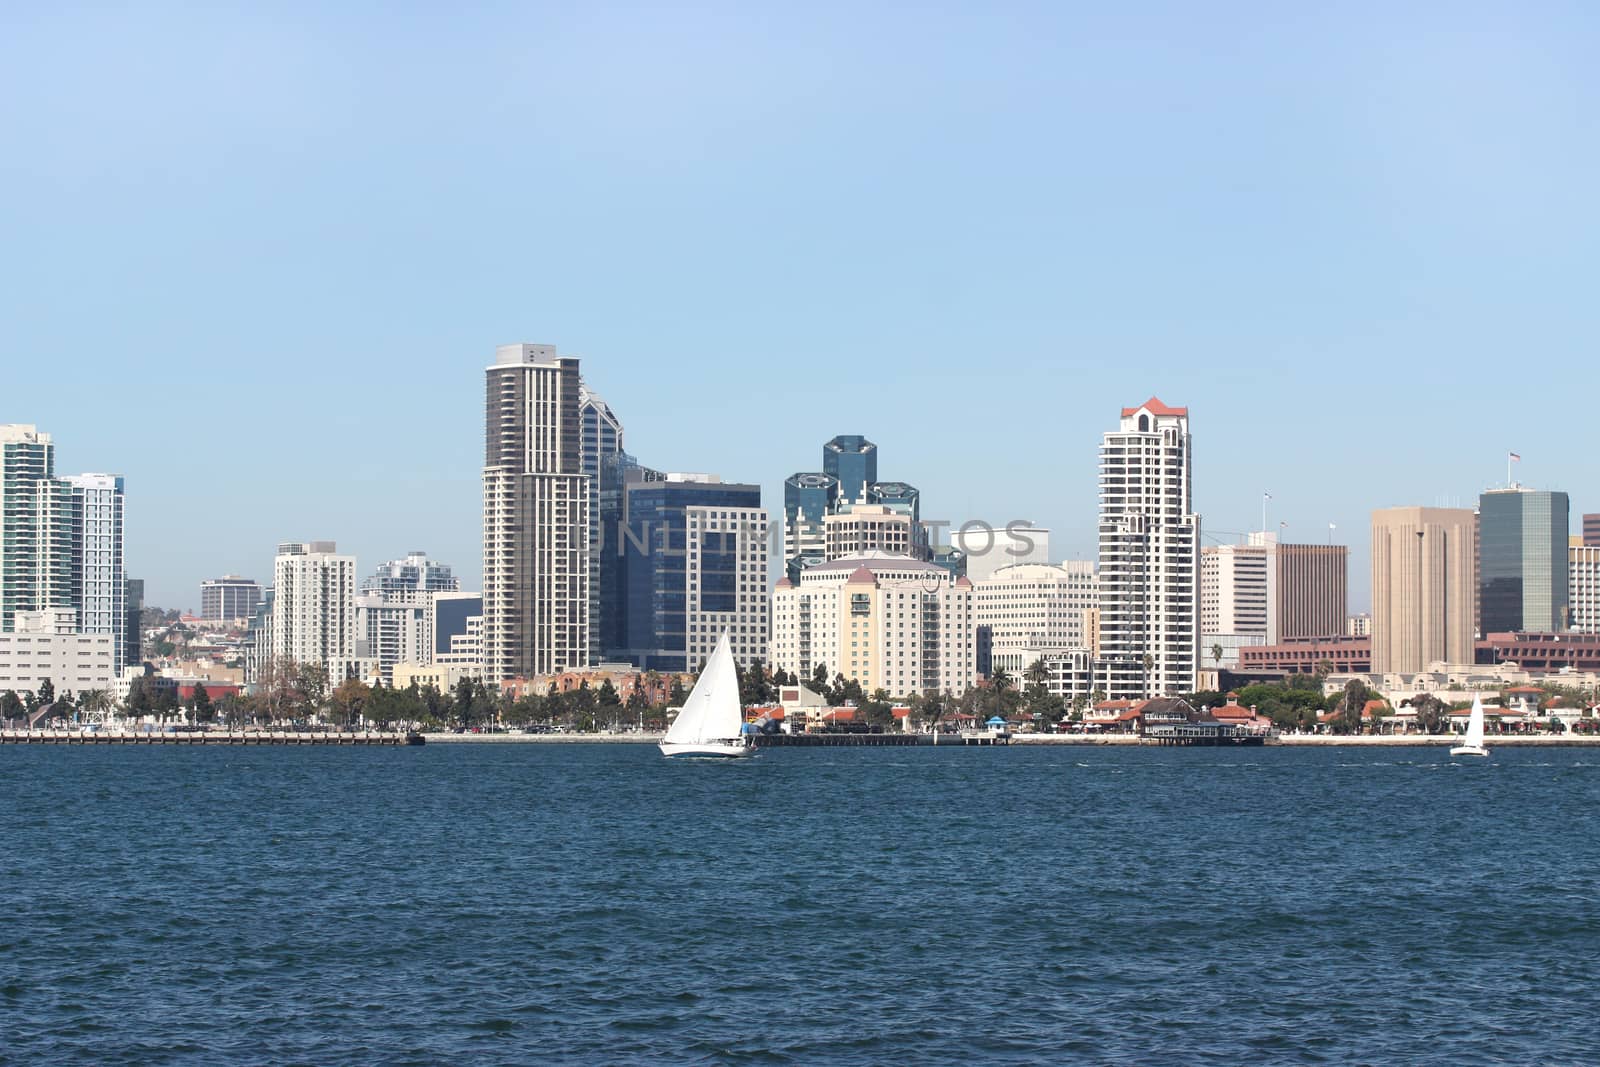 San Diego by ziss